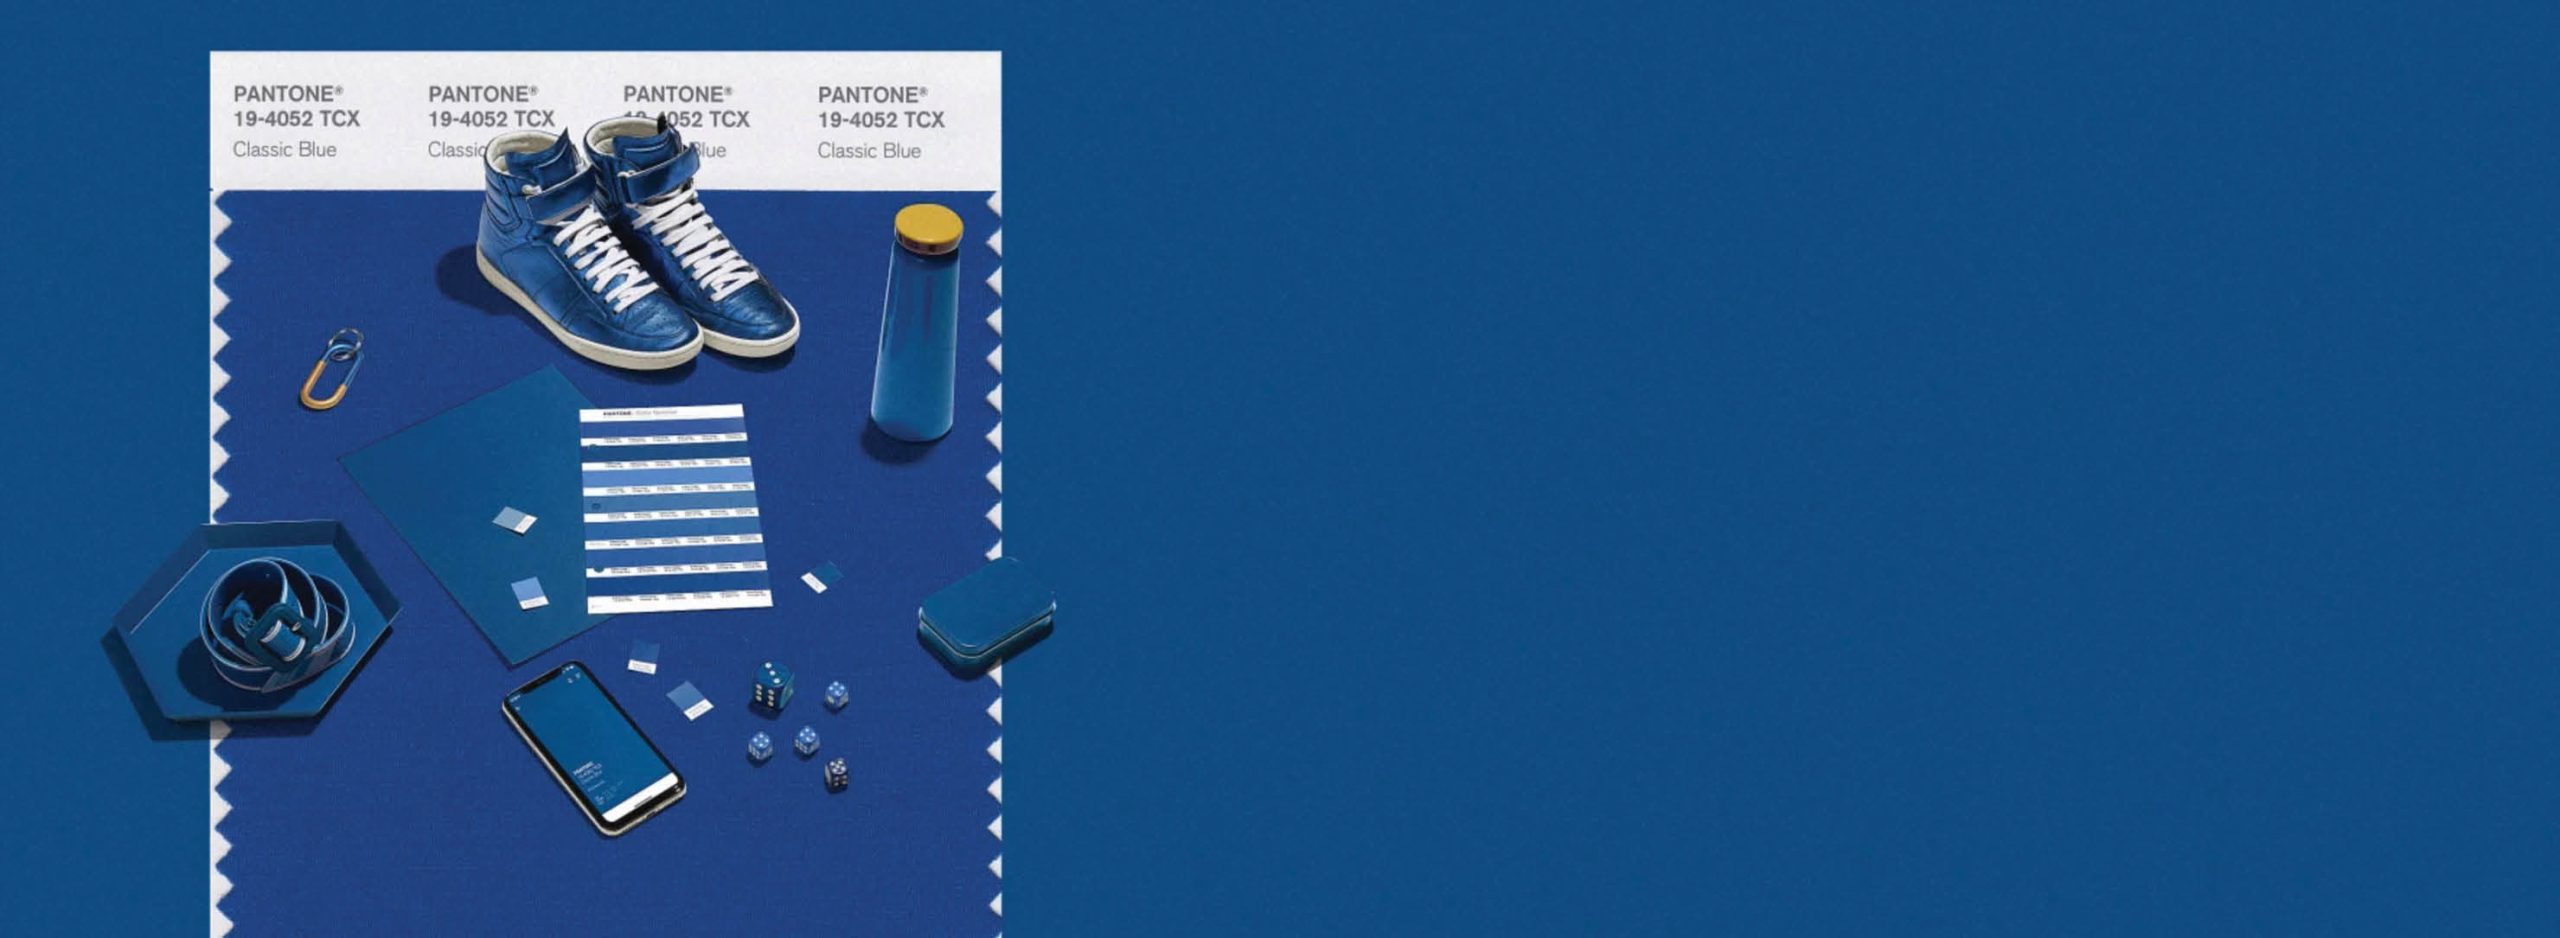 Pantone Color of the Year: A Classic Blue Shopping Guide by Neiter Creative